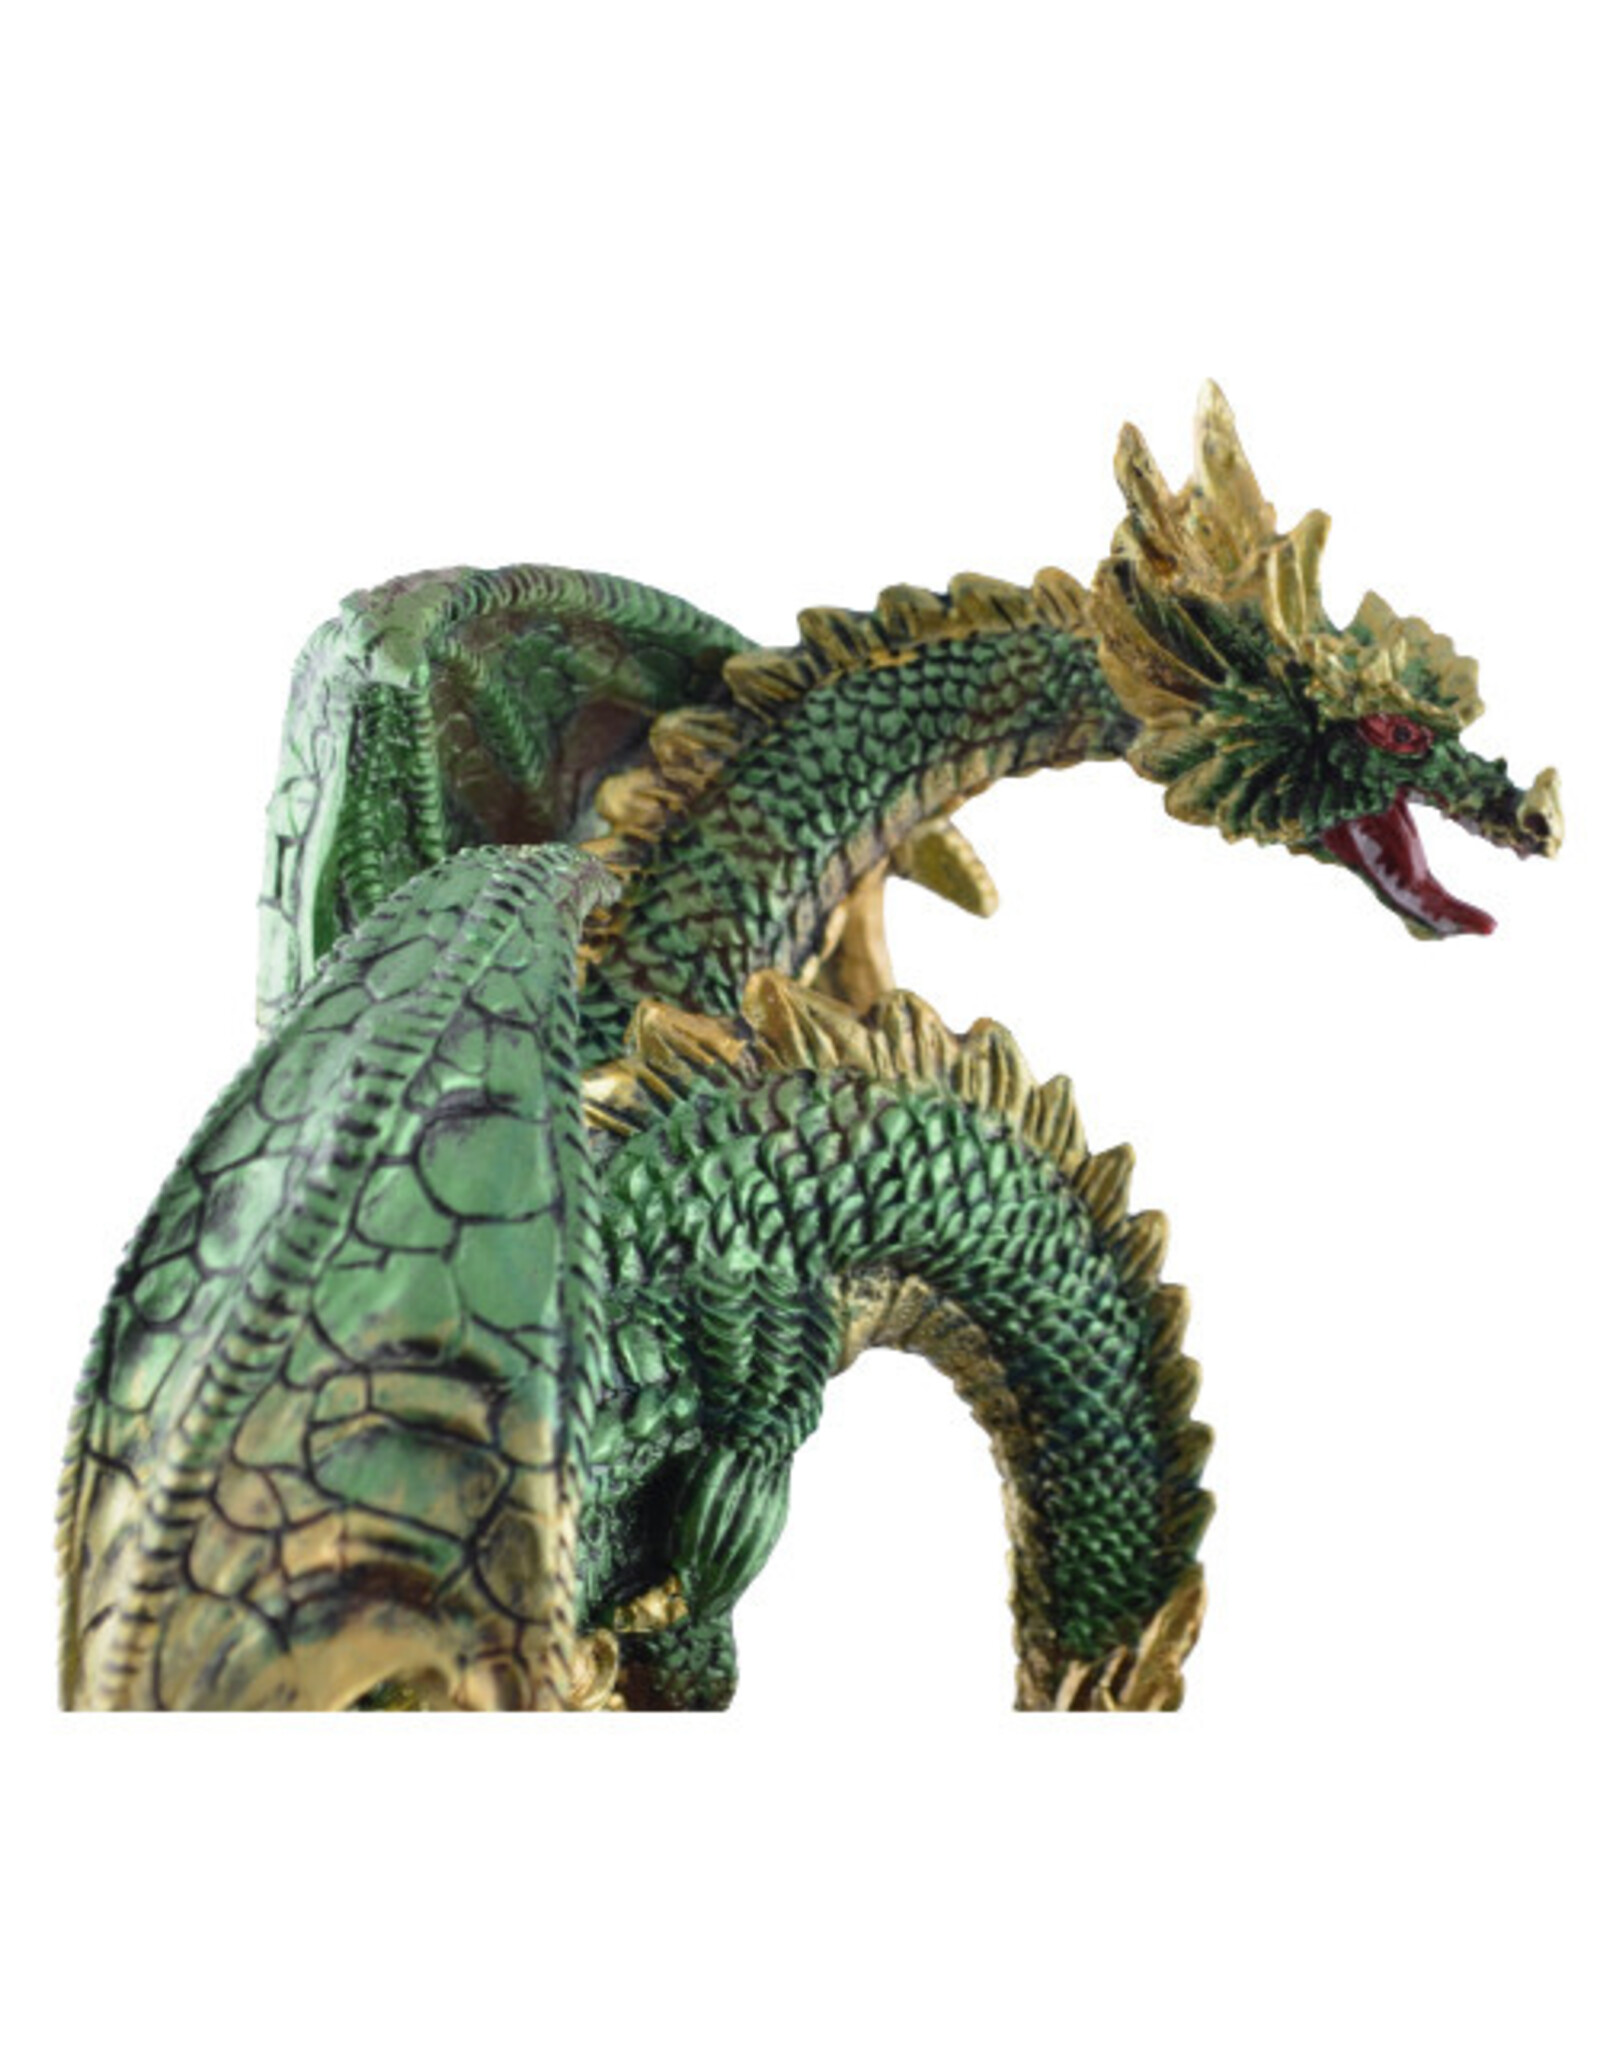 VG Giftware & Lifestyle - Two headed Dragon with Crystal LED light 25cm